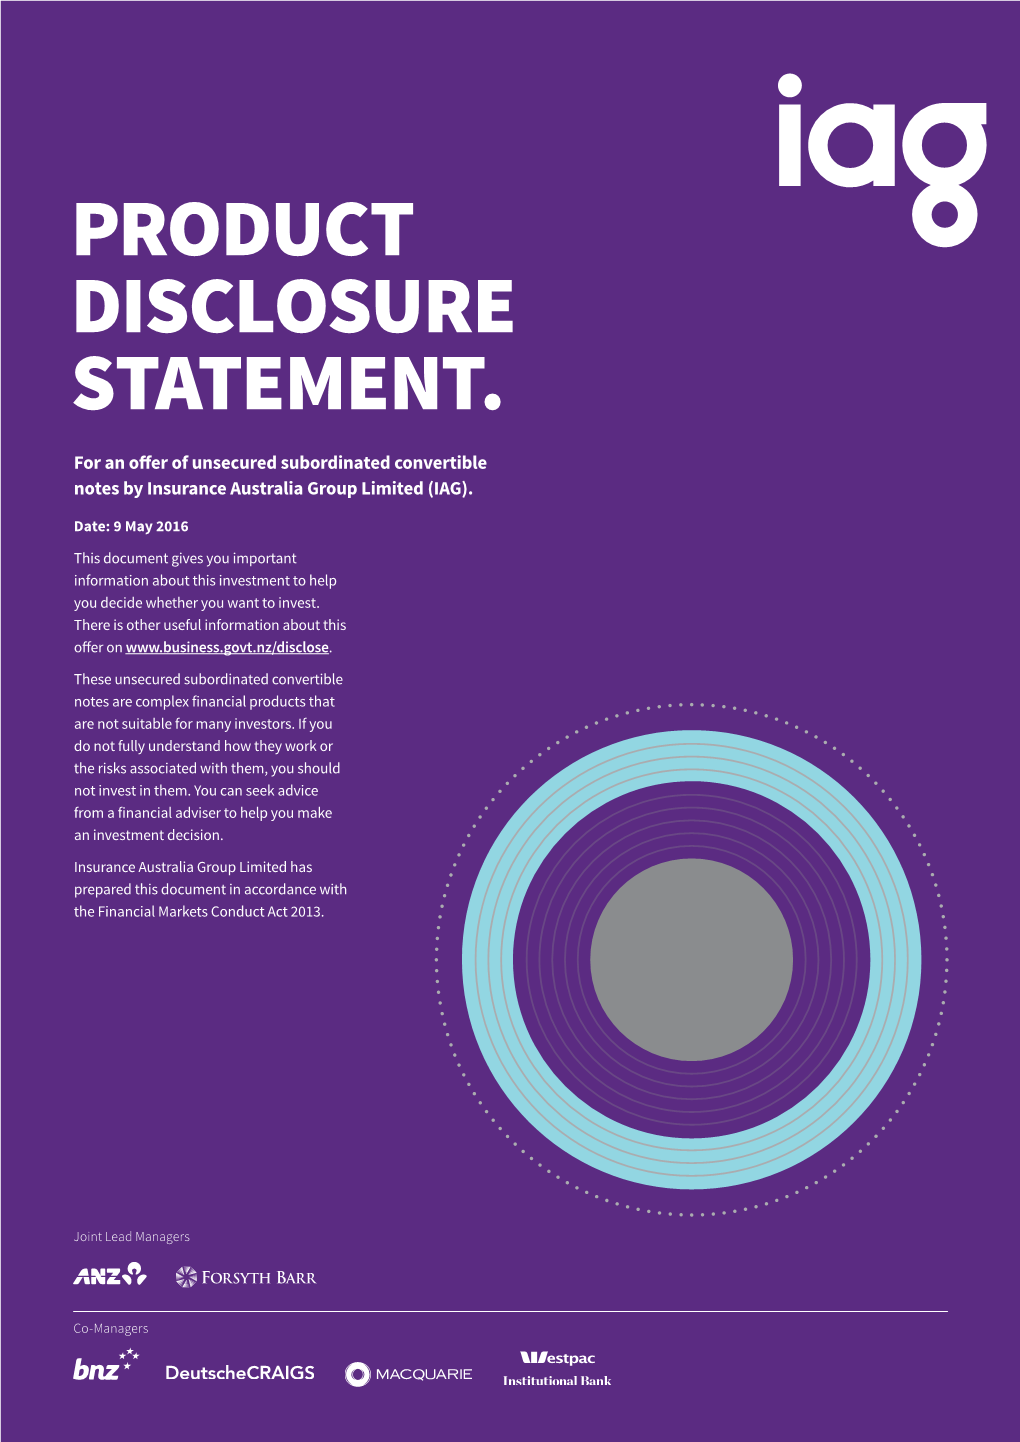 PRODUCT DISCLOSURE STATEMENT. for an Offer of Unsecured Subordinated Convertible Notes by Insurance Australia Group Limited (IAG)